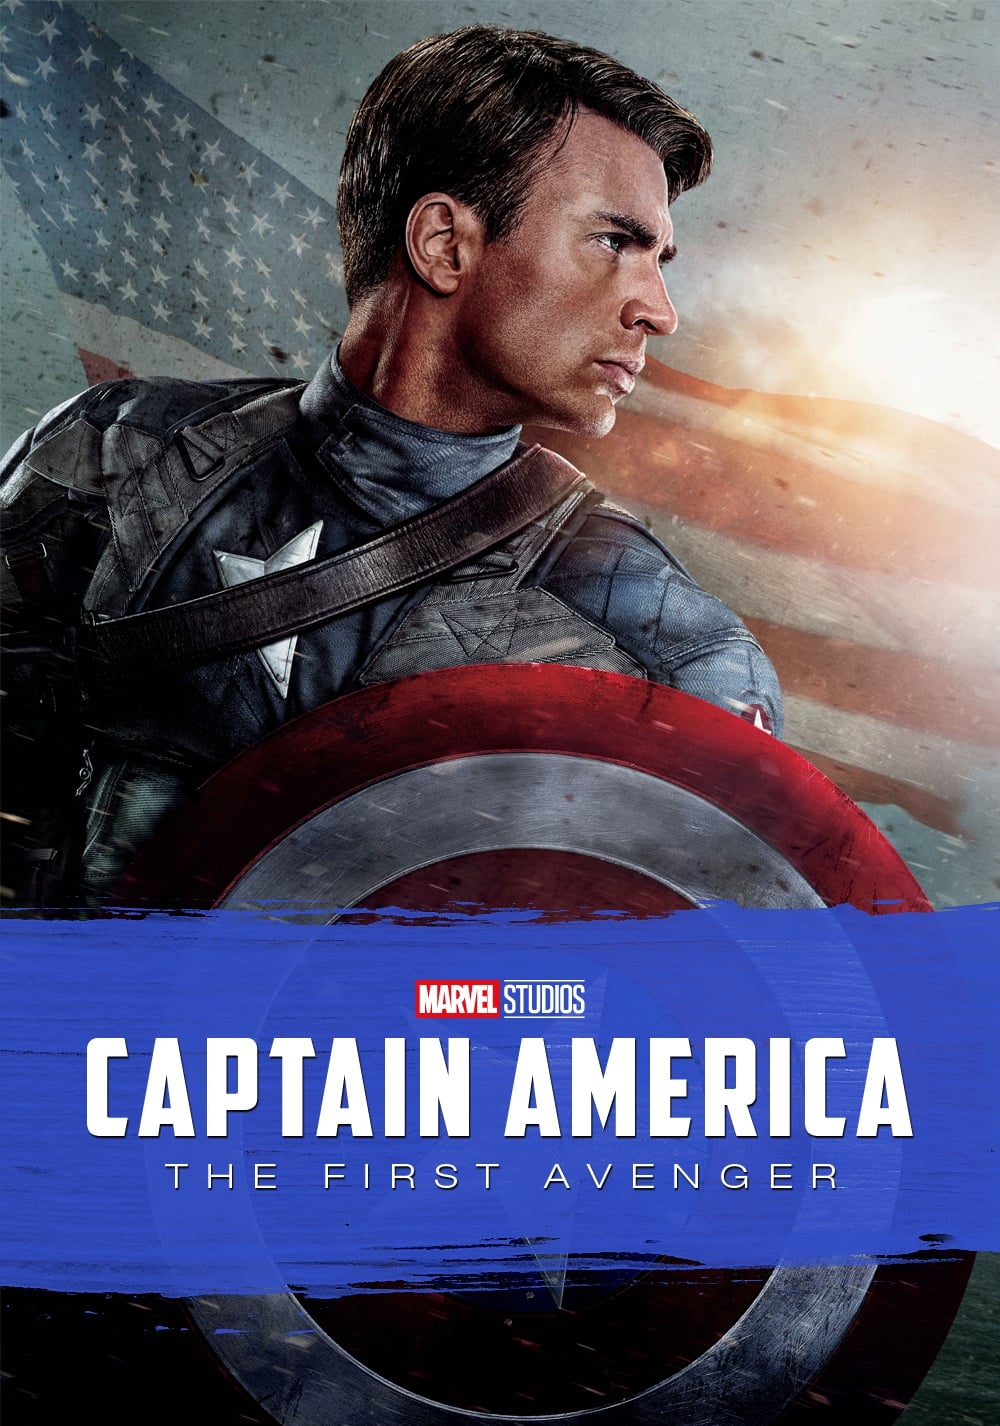 Captain America The First Avenger (2011) REMUX 4K HDR Latino – CMHDD